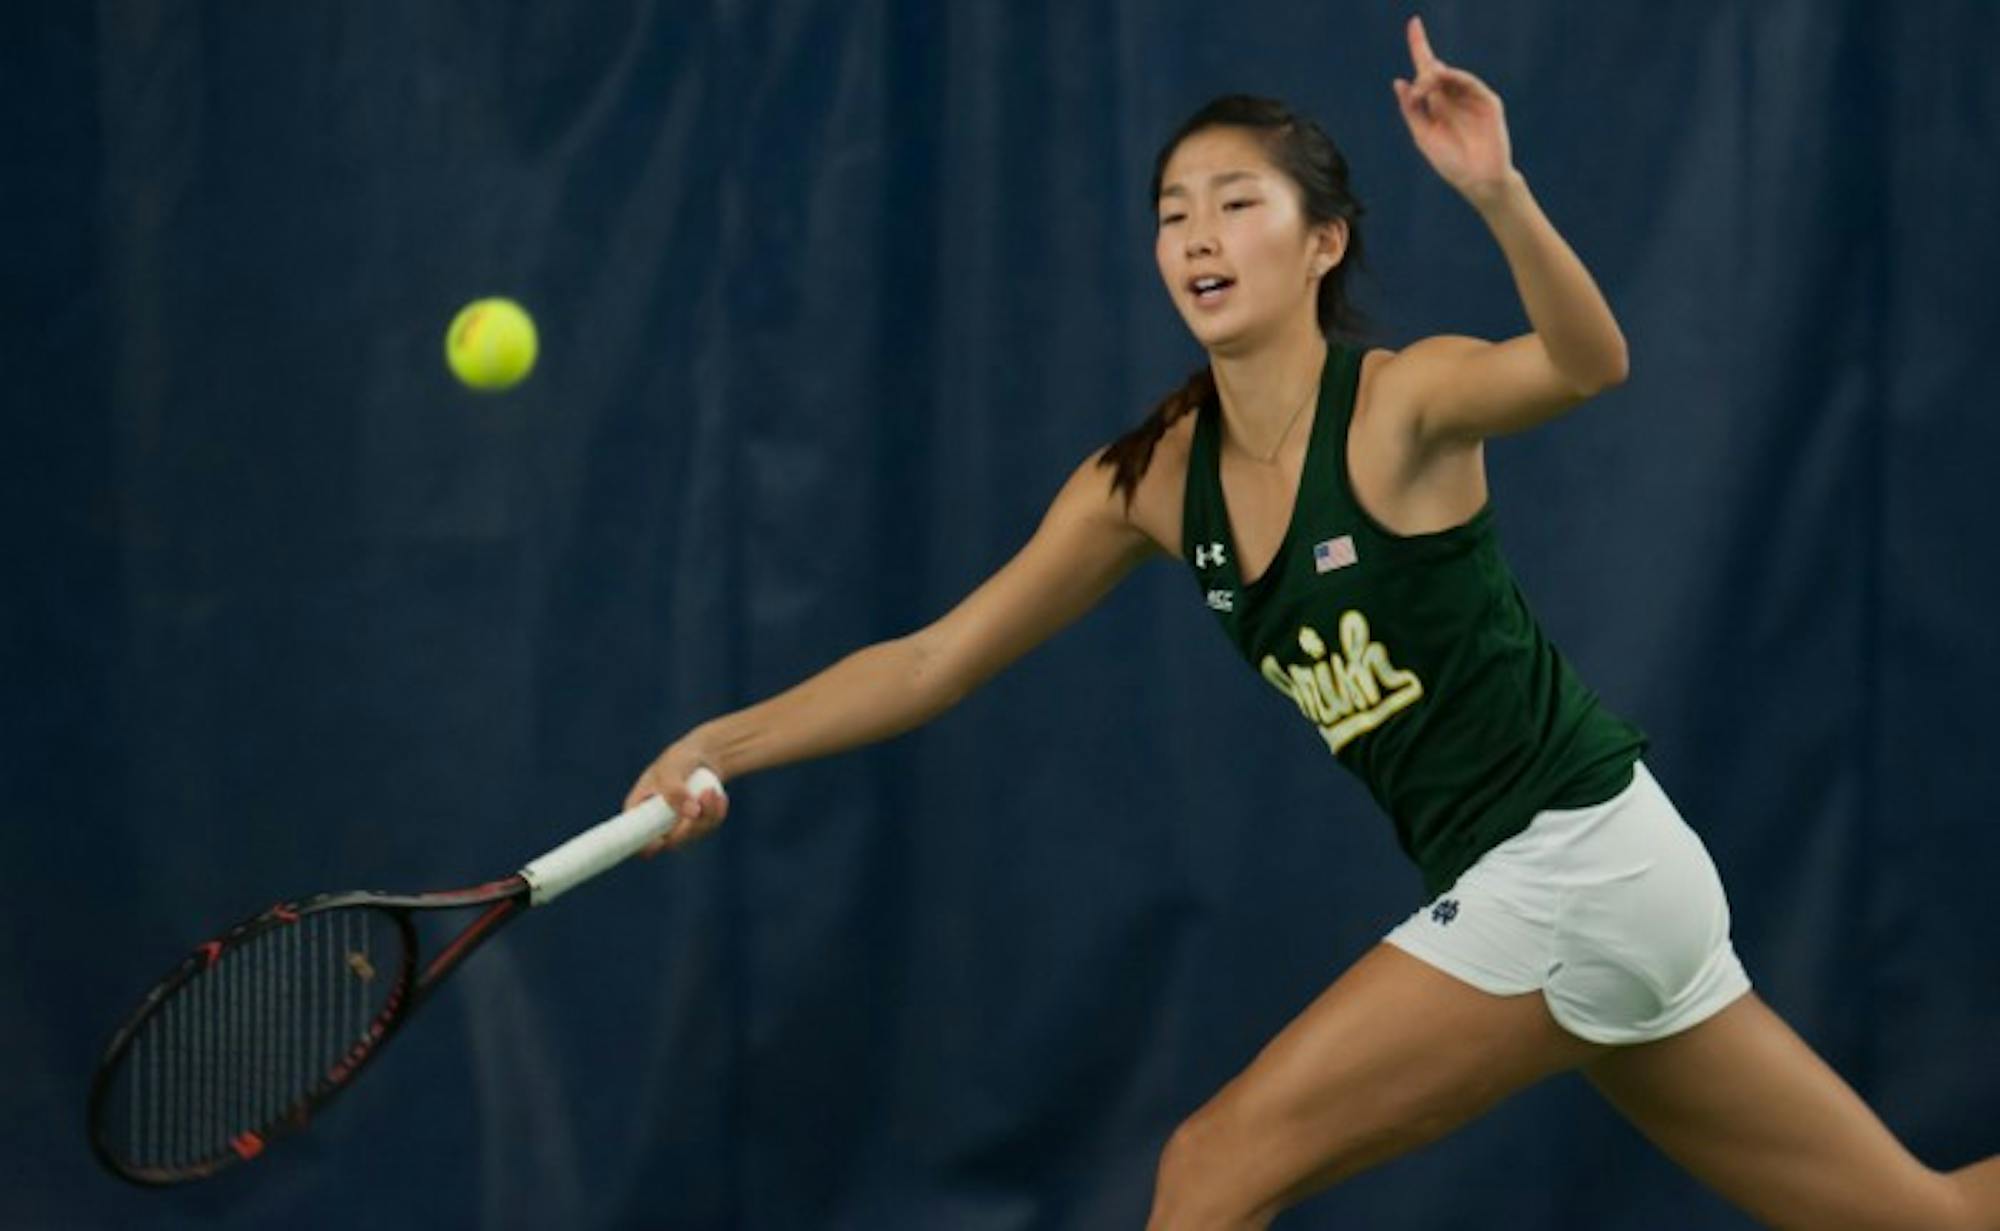 Irish junior Rachel Chong stretches to return the ball during Notre Dame’s 5-2 victory over Purdue on Feb. 22 at Eck Tennis Pavilion. Chong went undefeated during play in her last event, the Wildcat Invitational. She went 17-8 overall last year with a 7-4 record in ACC play.